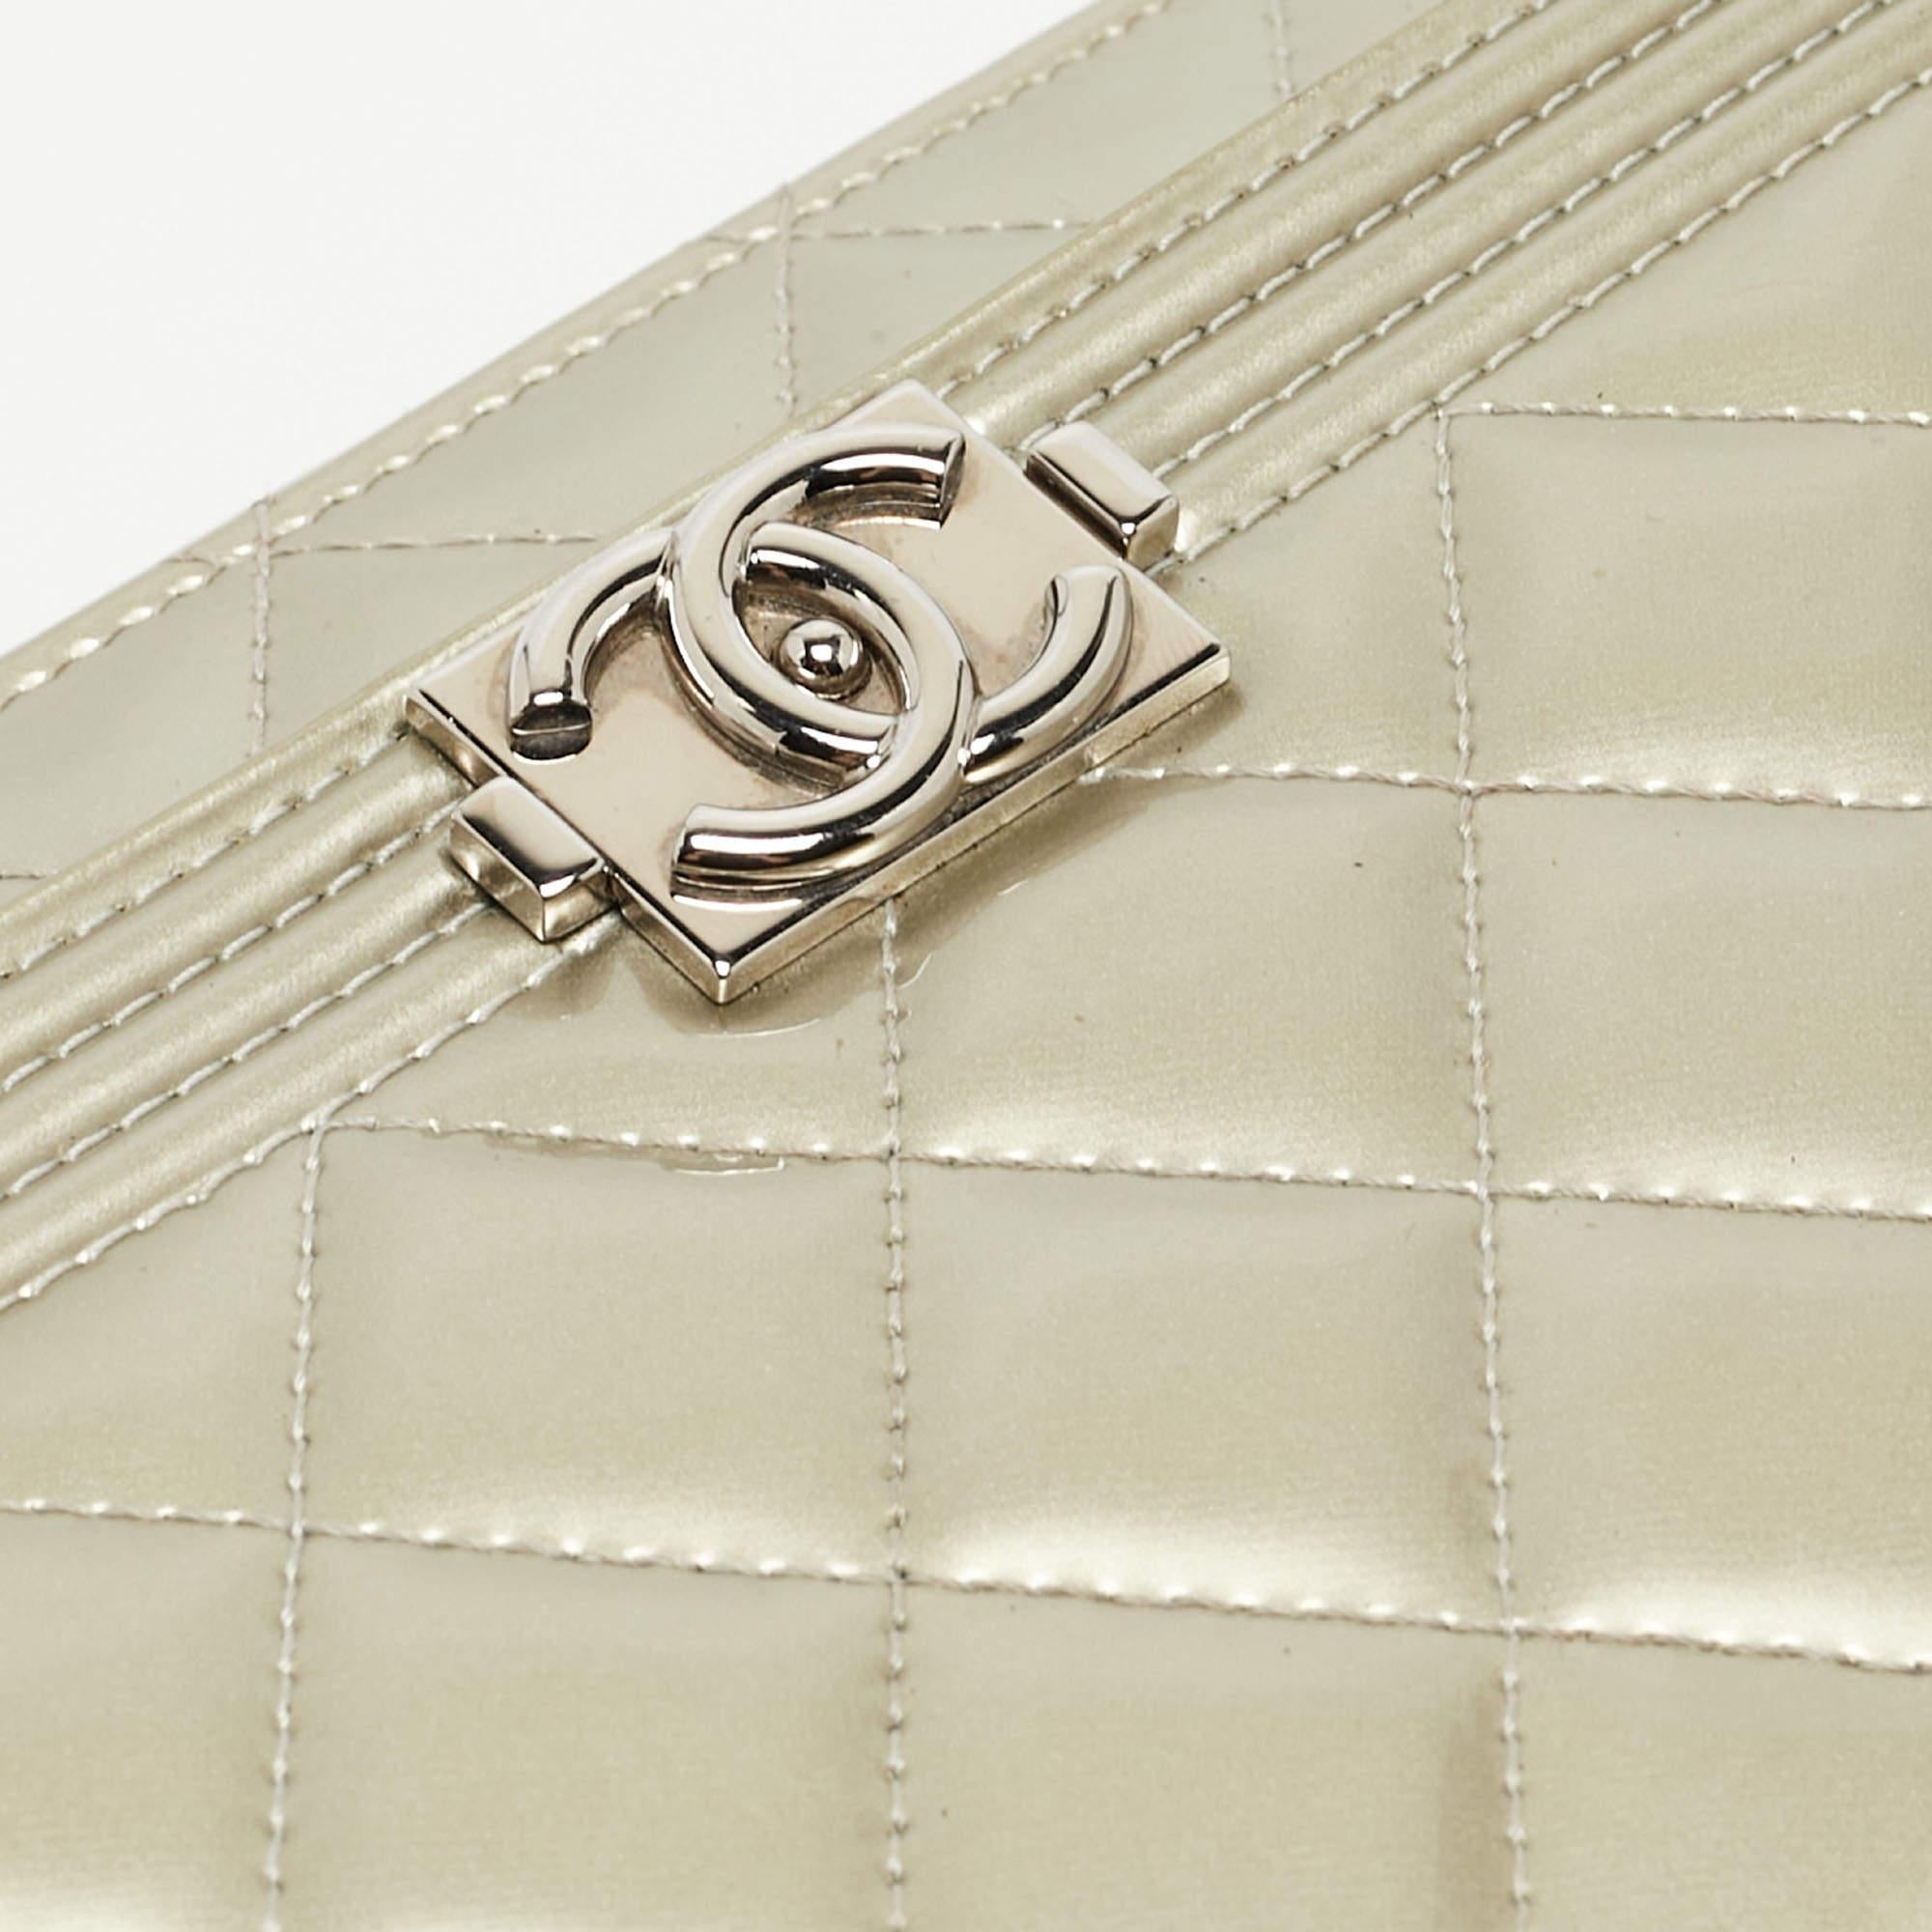 Chanel Pale Gold Quilted Patent Leather Boy WOC Bag 16